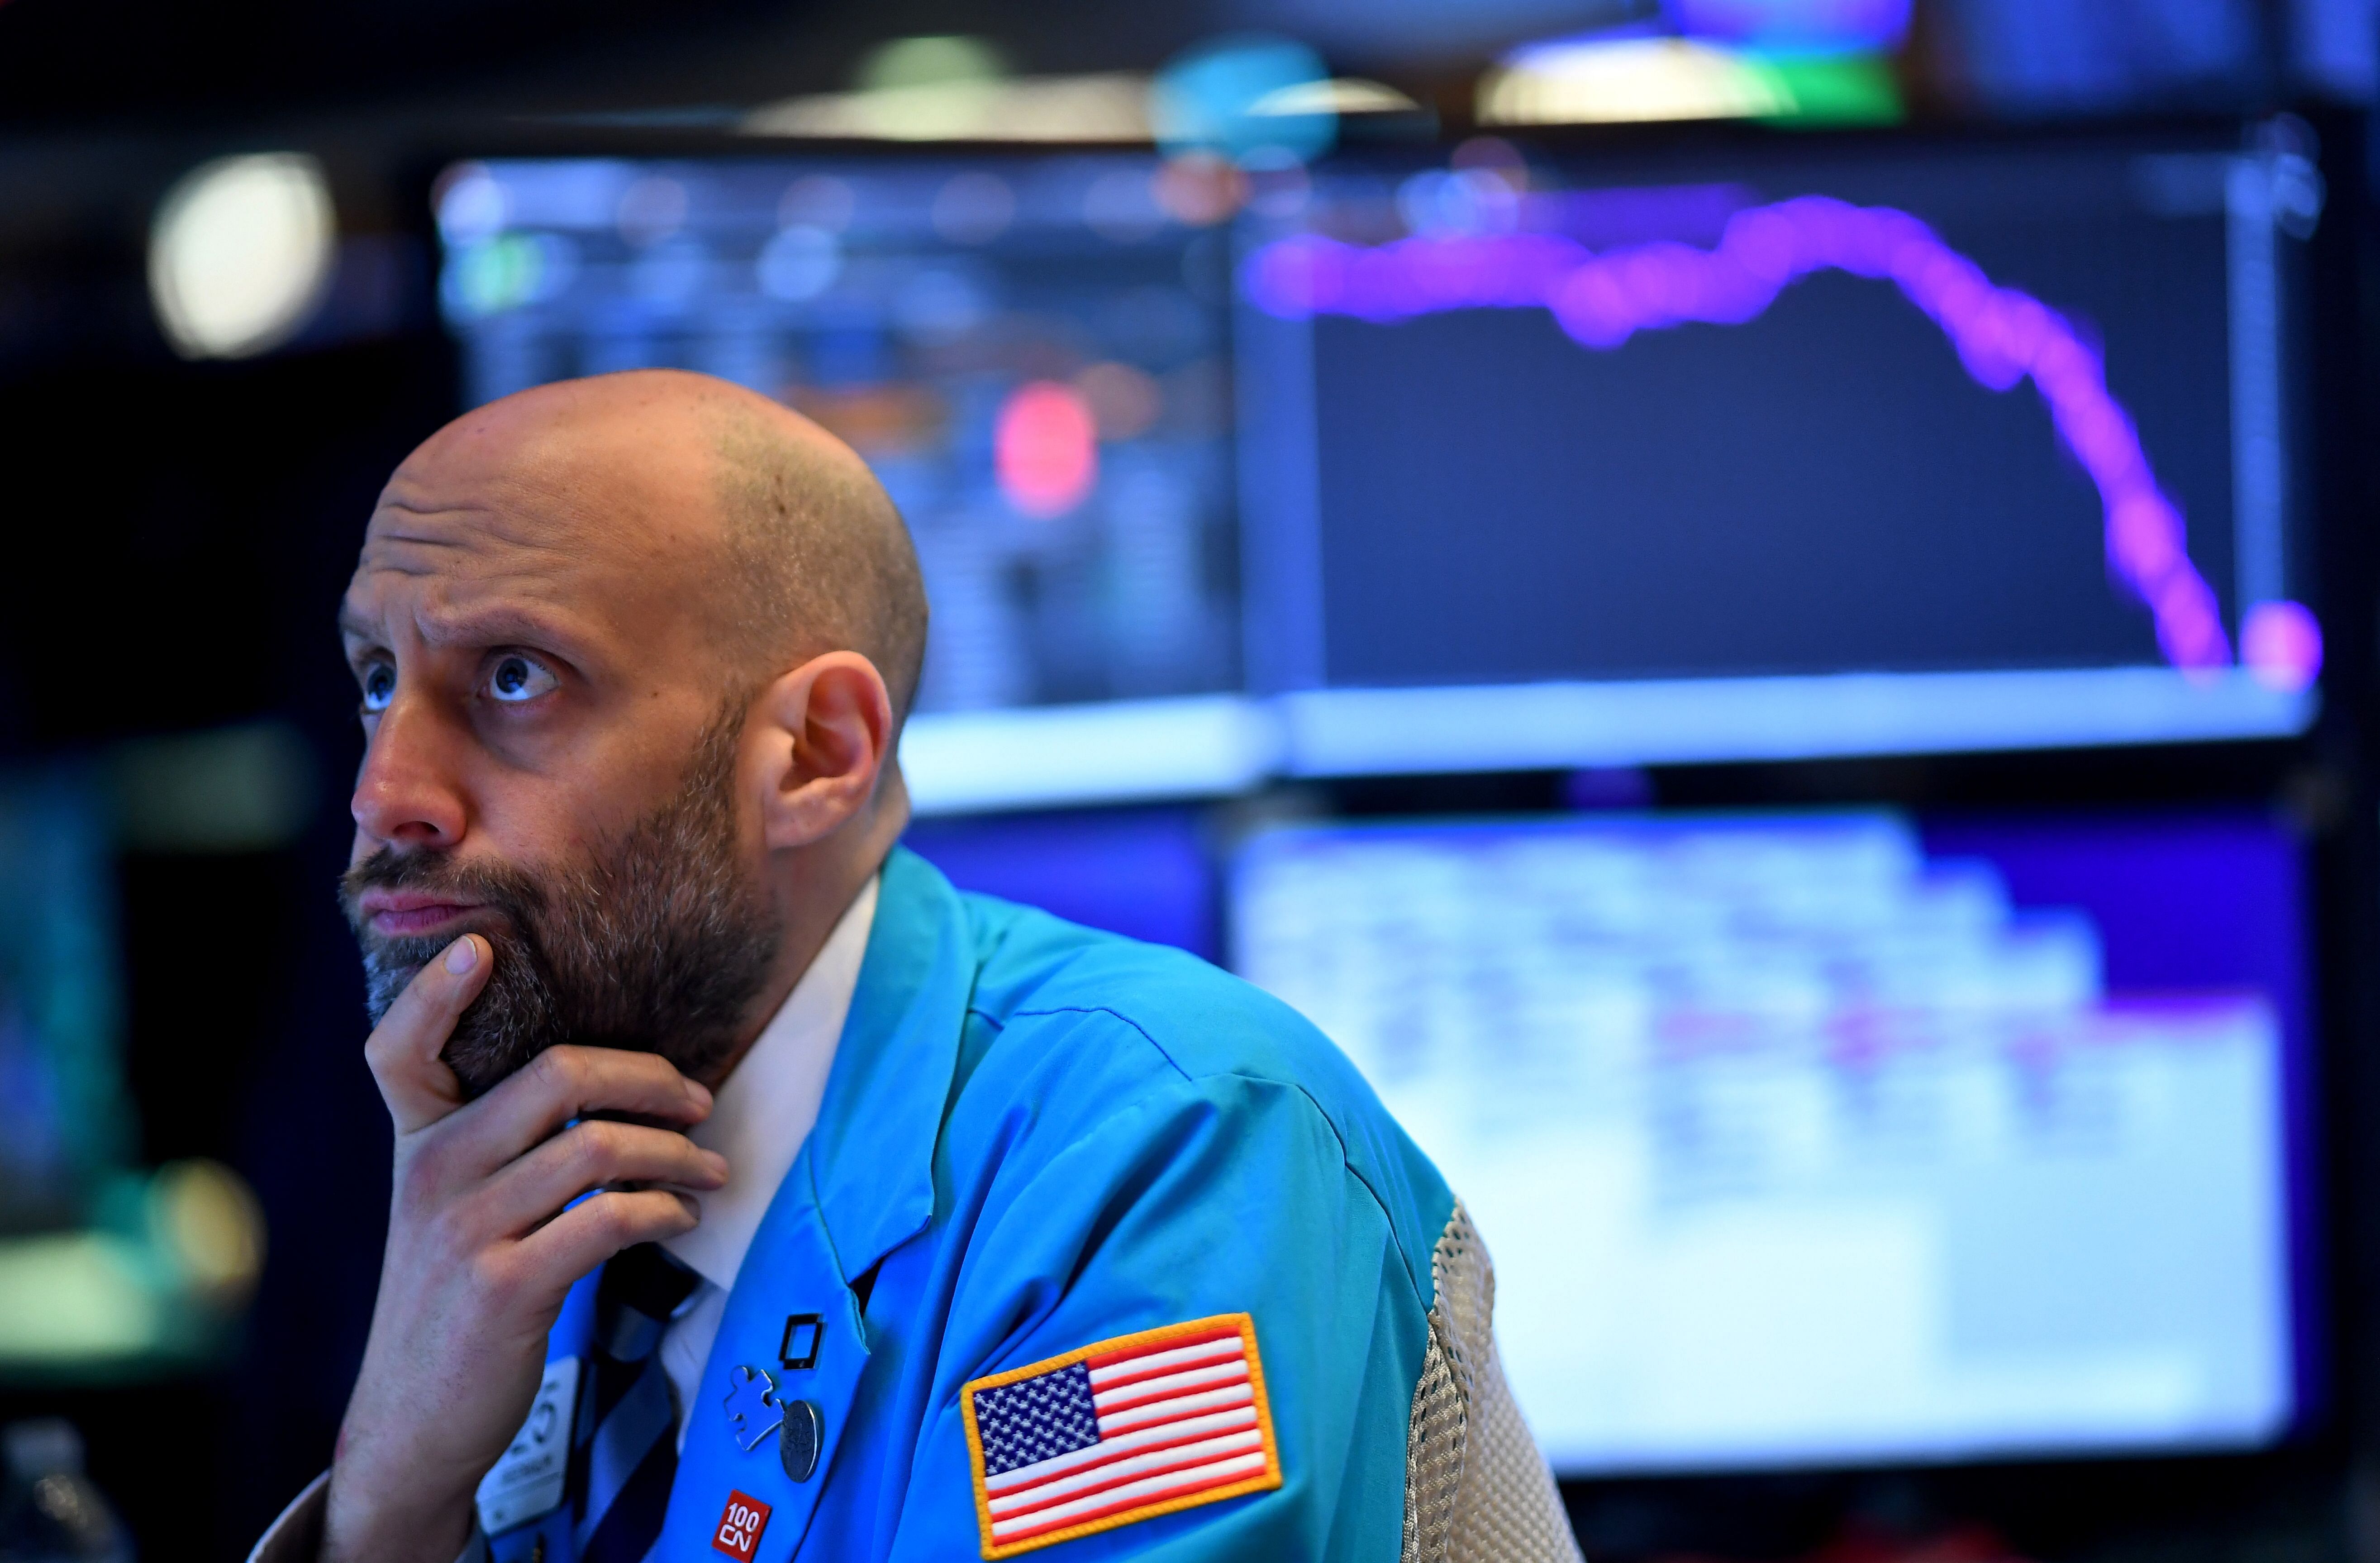  In this file photo traders work during the opening bell at the New York Stock Exchange (NYSE) on March 19, 2020, at Wall Street in New York City. (Credit: AFP Photo)